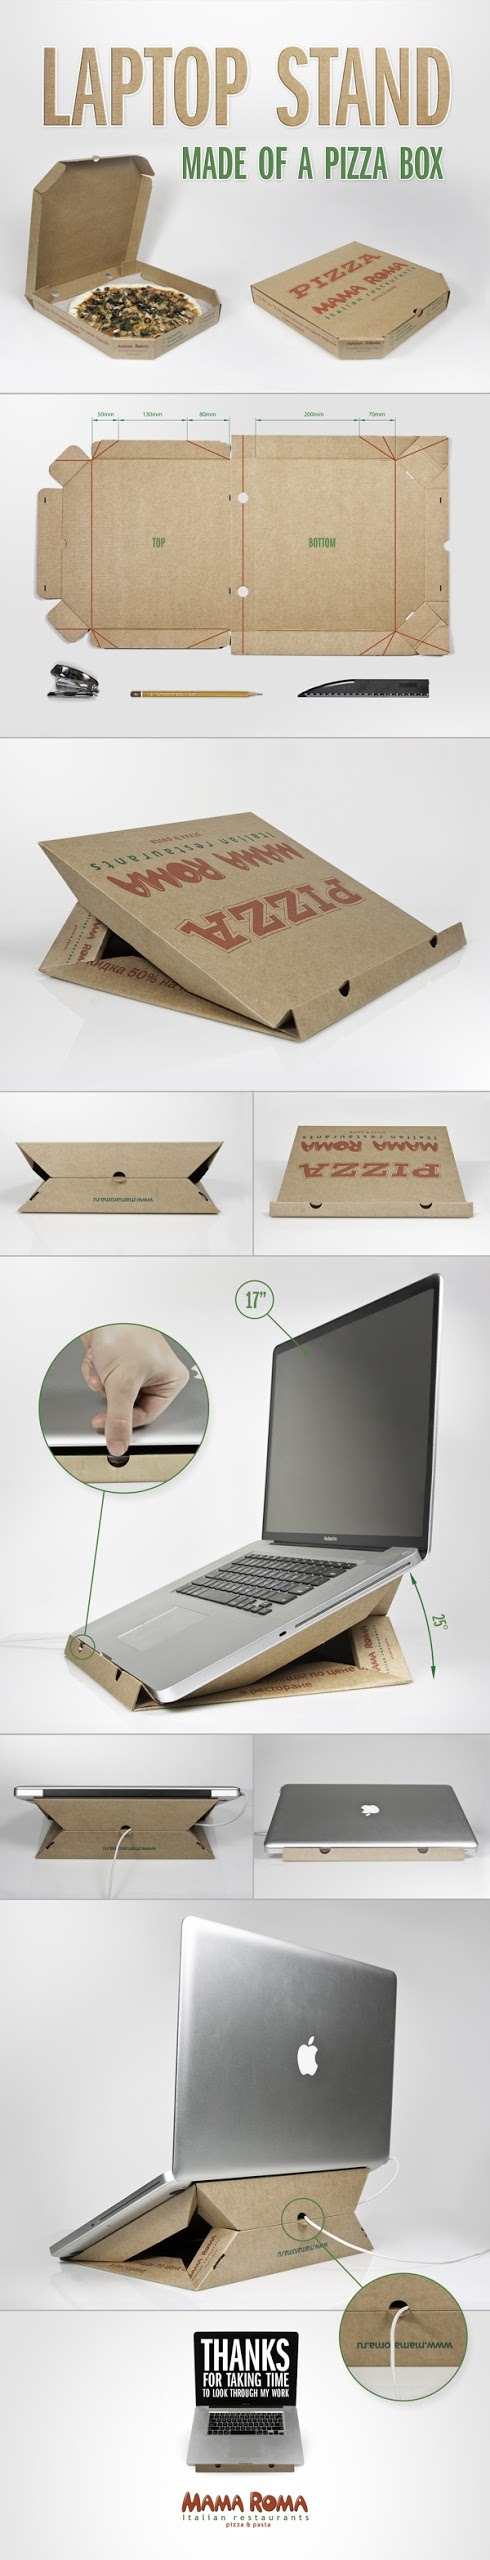 Do i yourself laptop stand made of a pizza box - meme